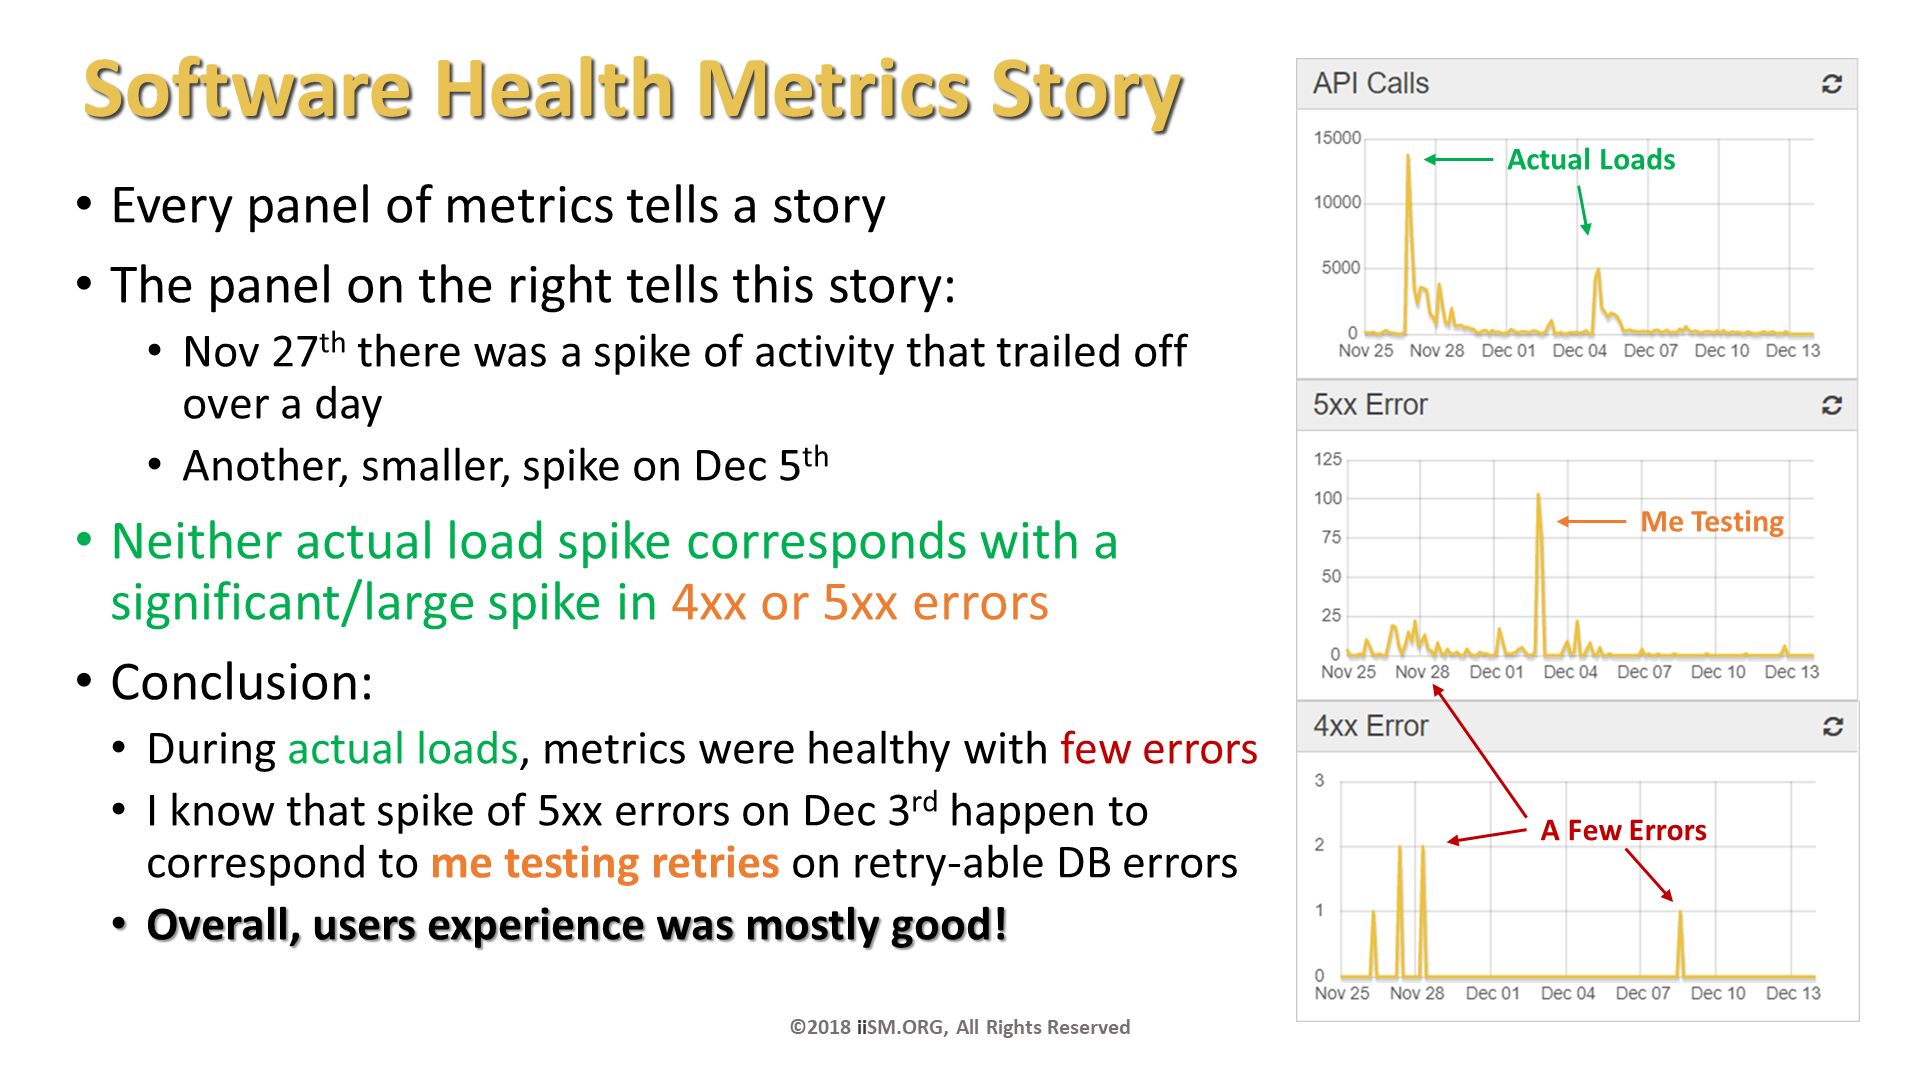 Software Health Metrics Story. Every panel of metrics tells a story
The panel on the right tells this story:
Nov 27th there was a spike of activity that trailed off over a day
Another, smaller, spike on Dec 5th 
Neither actual load spike corresponds with a significant/large spike in 4xx or 5xx errors
Conclusion: 
During actual loads, metrics were healthy with few errors 
I know that spike of 5xx errors on Dec 3rd happen to correspond to me testing retries on retry-able DB errors
Overall, users experience was mostly good!

. ©2018 iiSM.ORG, All Rights Reserved. Actual Loads. Me Testing. A Few Errors. 